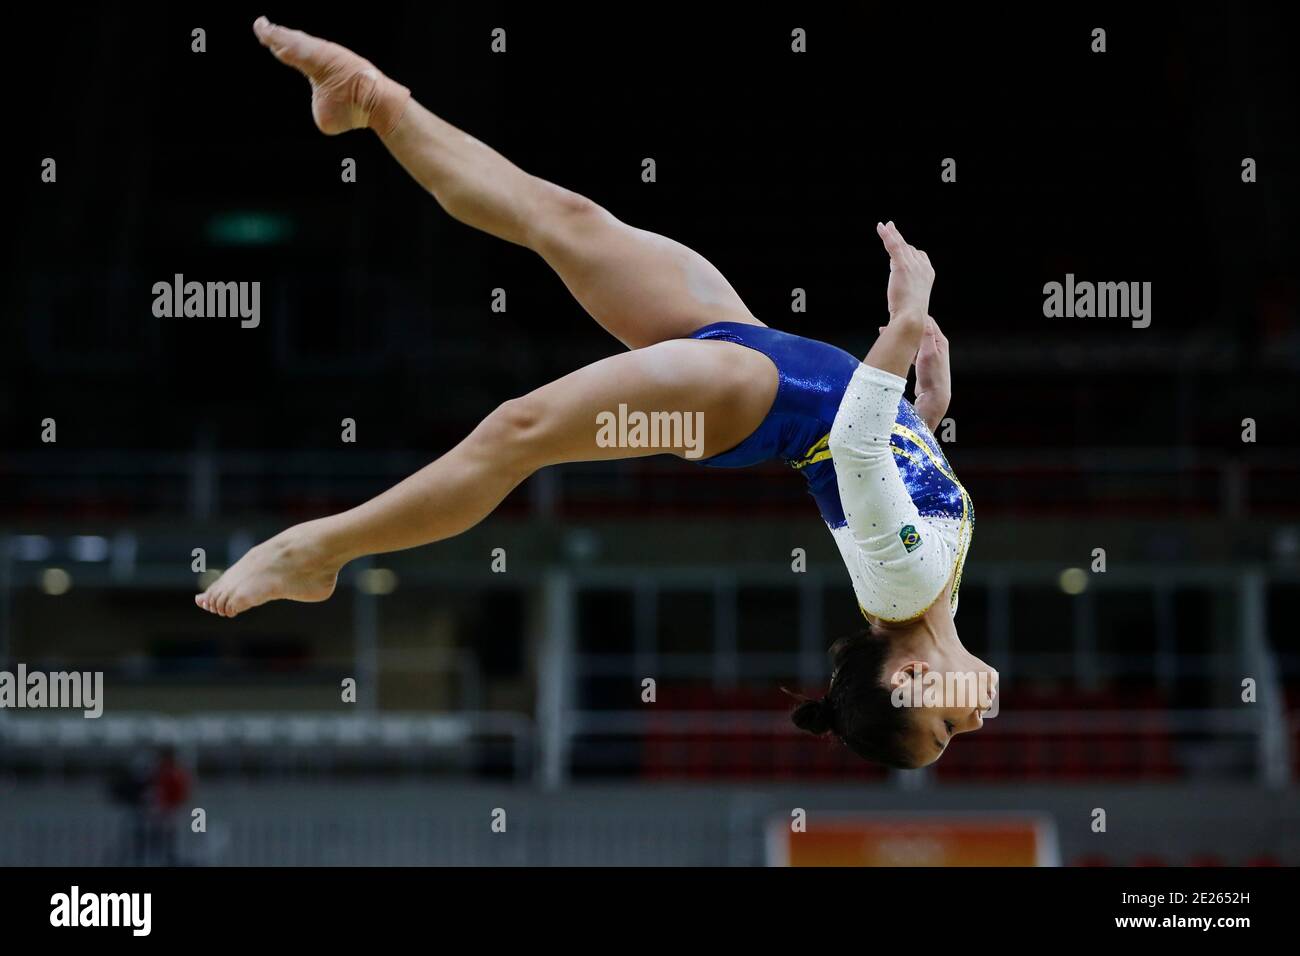 Flavia Saraiva at Rio 2016 Summer Olympic Games artistic gymnastics. Brazilian team ahlete performs vault training session before medal competition Stock Photo